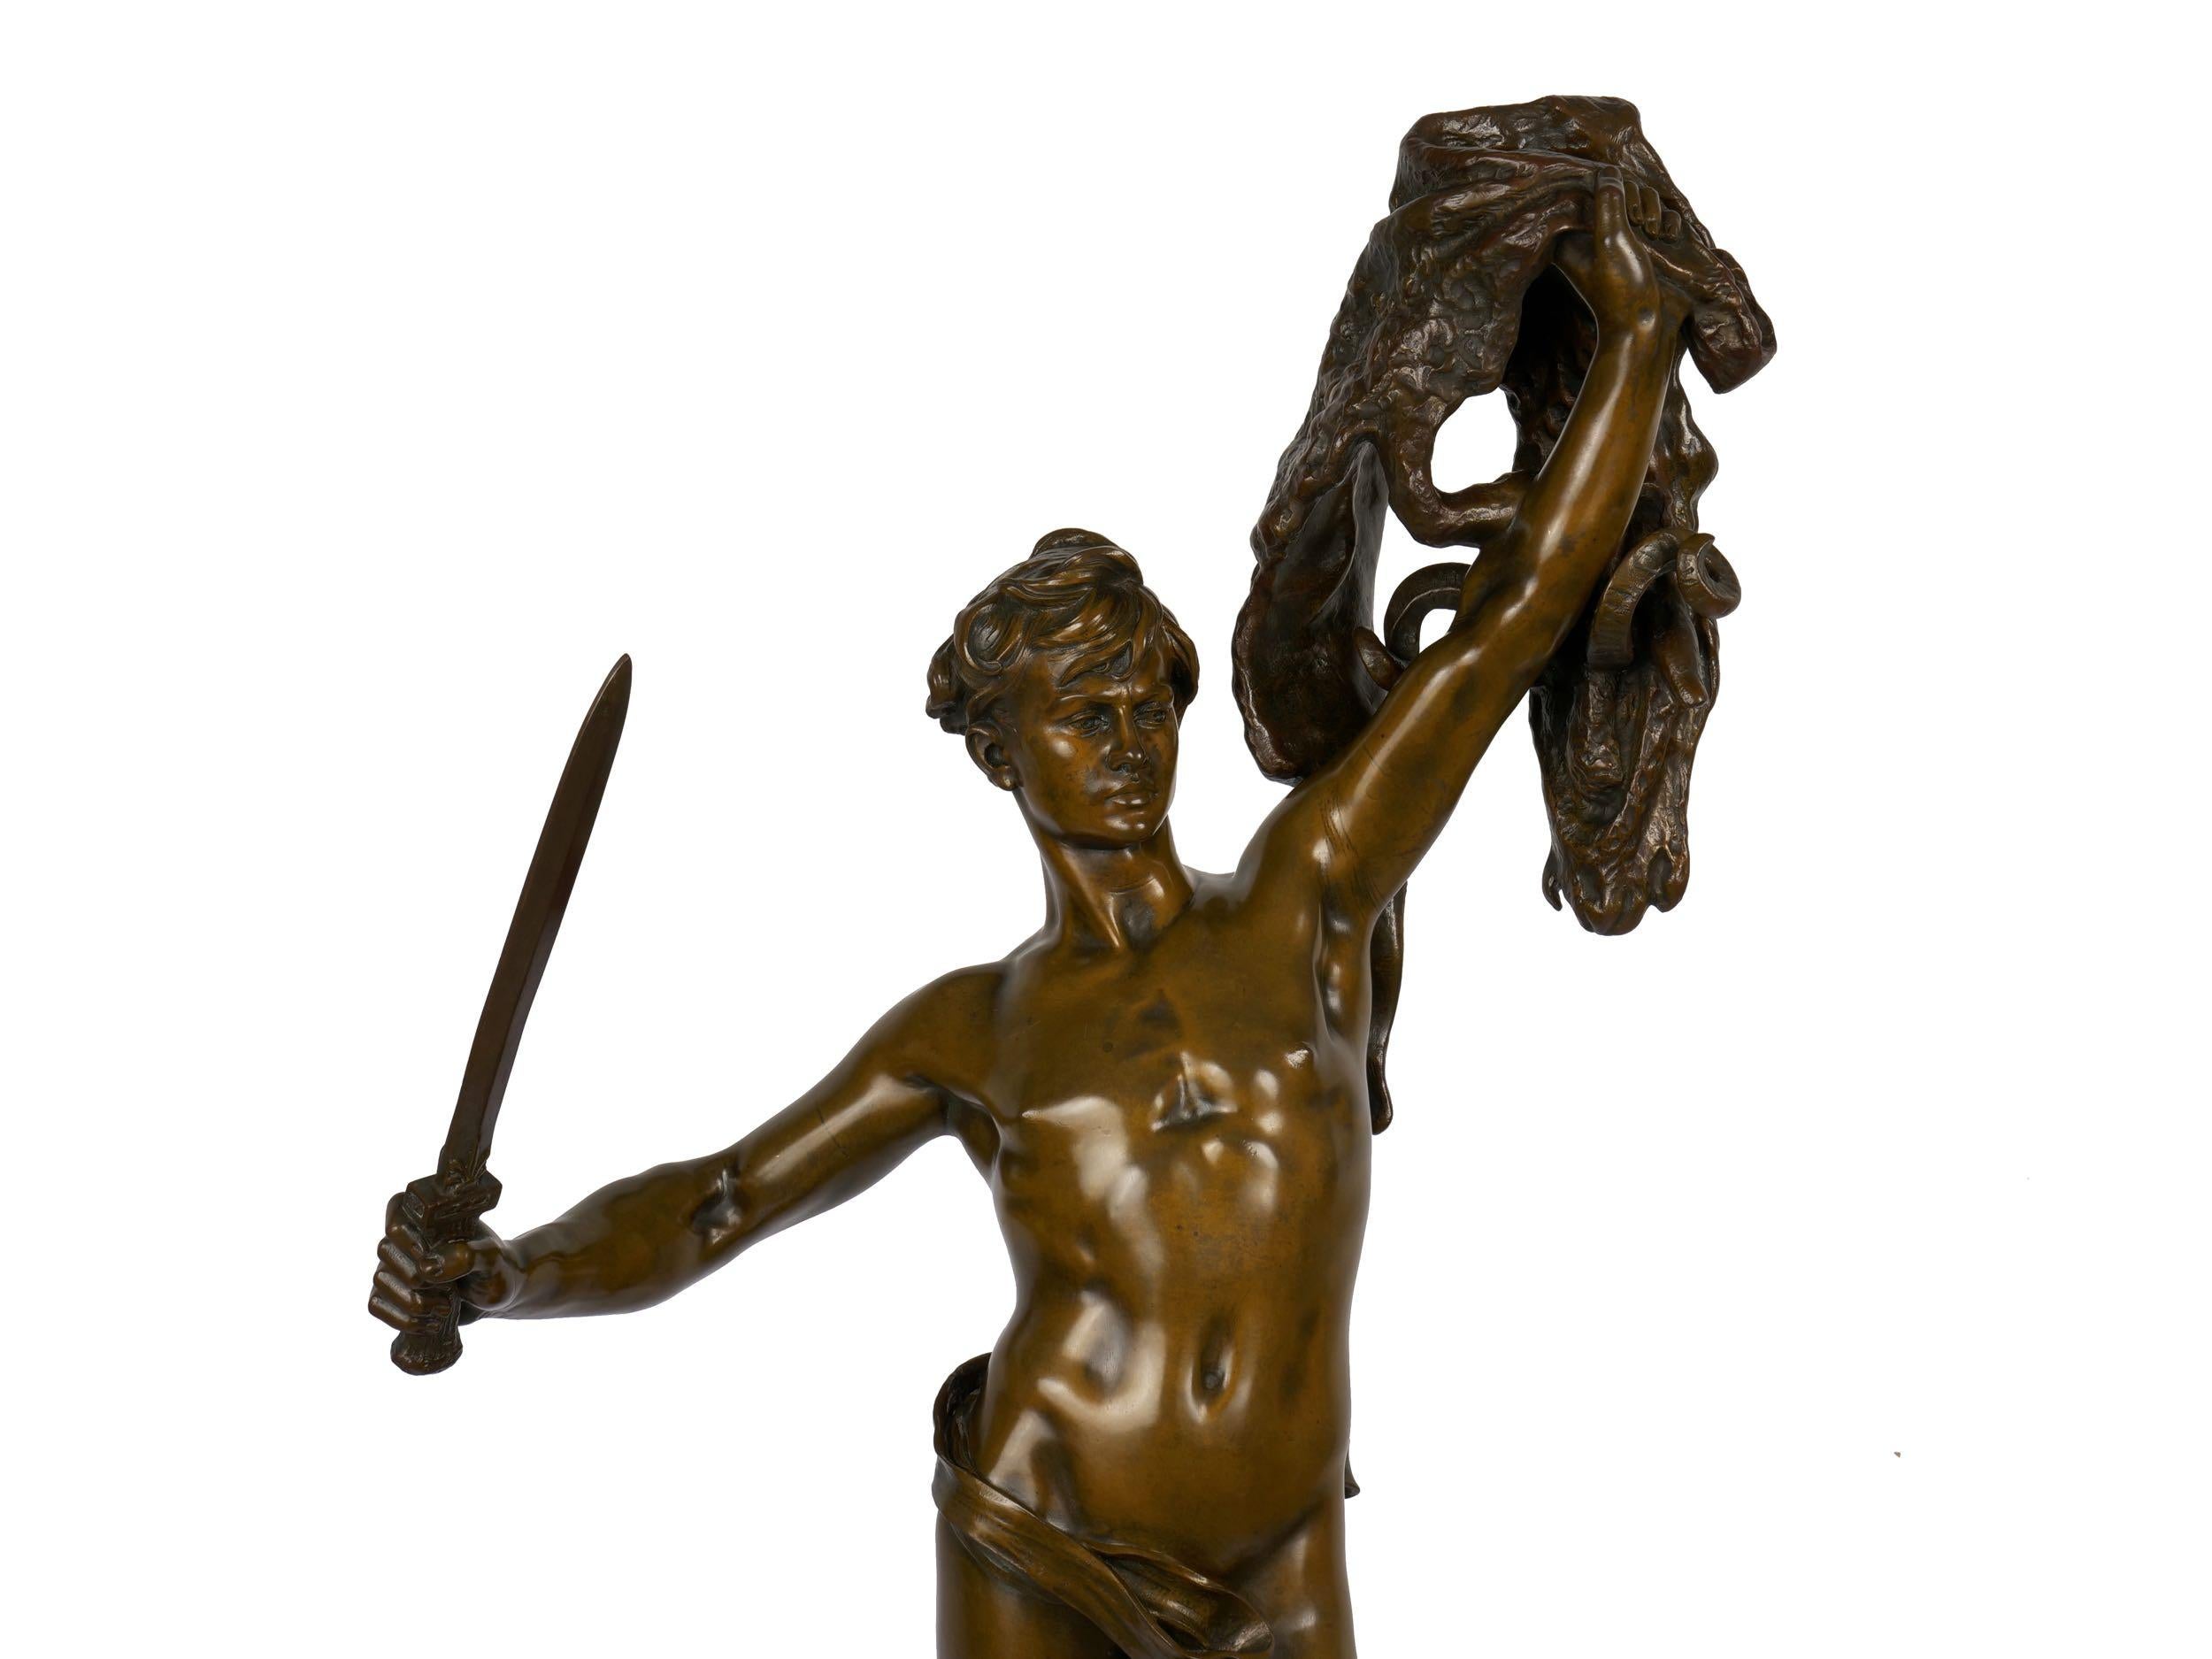 “Jason and the Golden Fleece” '1875' French Bronze Sculpture by Lanson & Susse 2